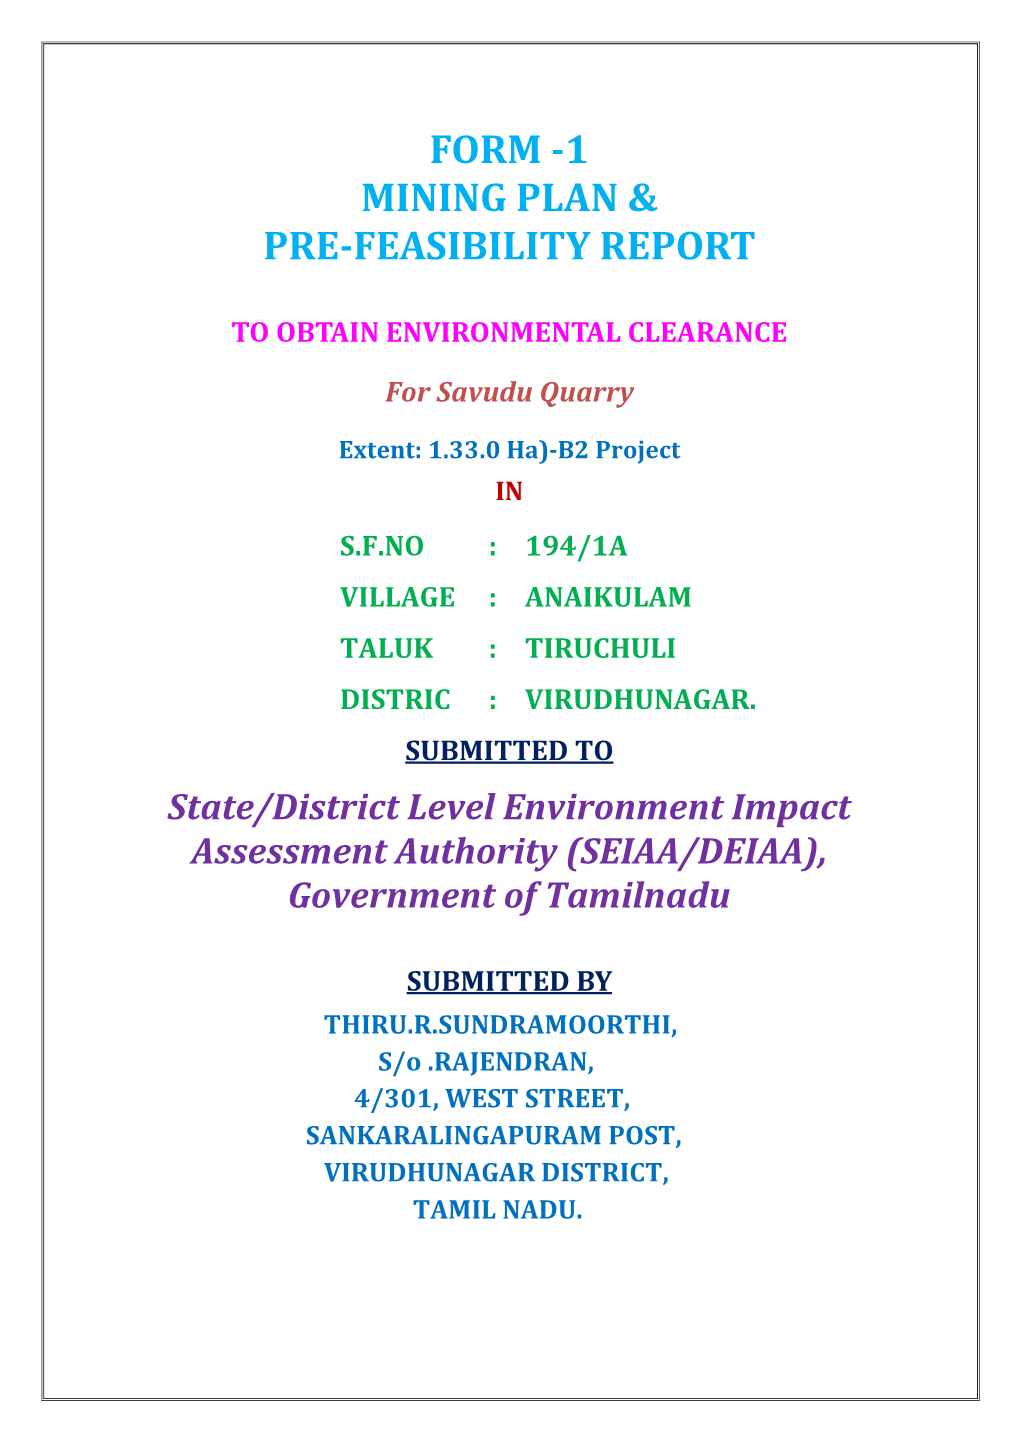 Form -1 Mining Plan & Pre-Feasibility Report